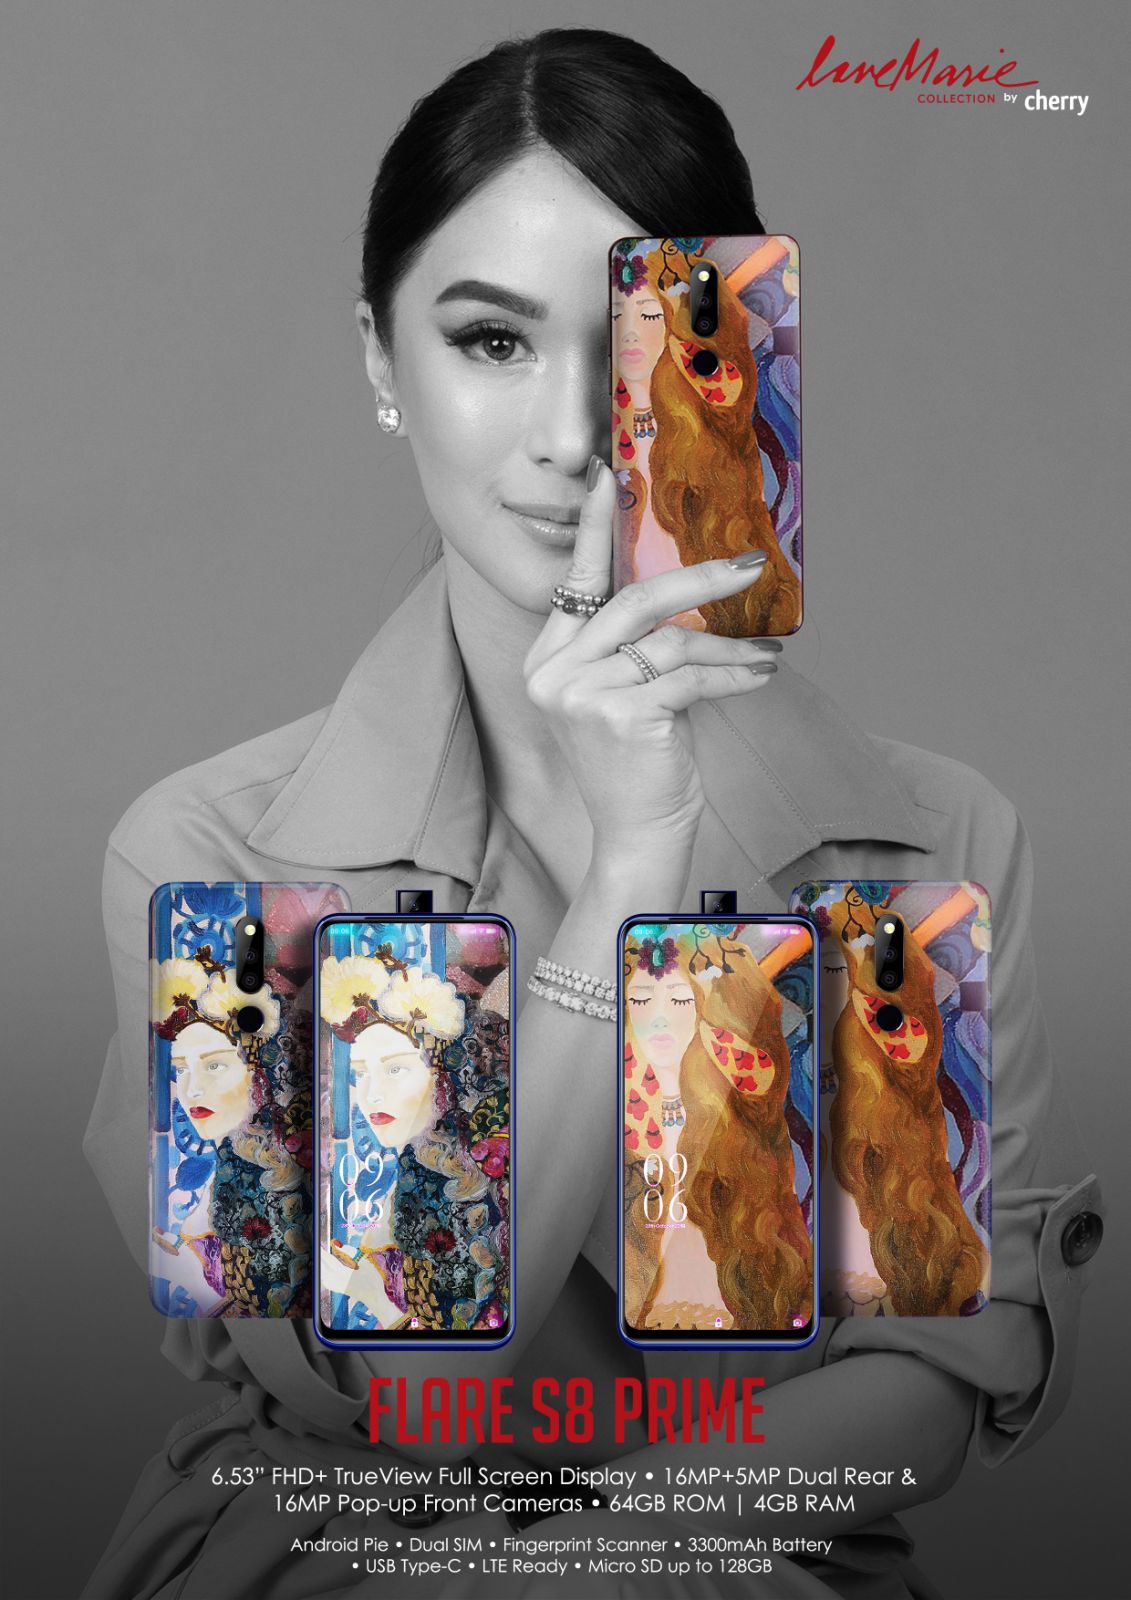 Cherry Mobile partners with Heart Evangelista for its 10th anniversary